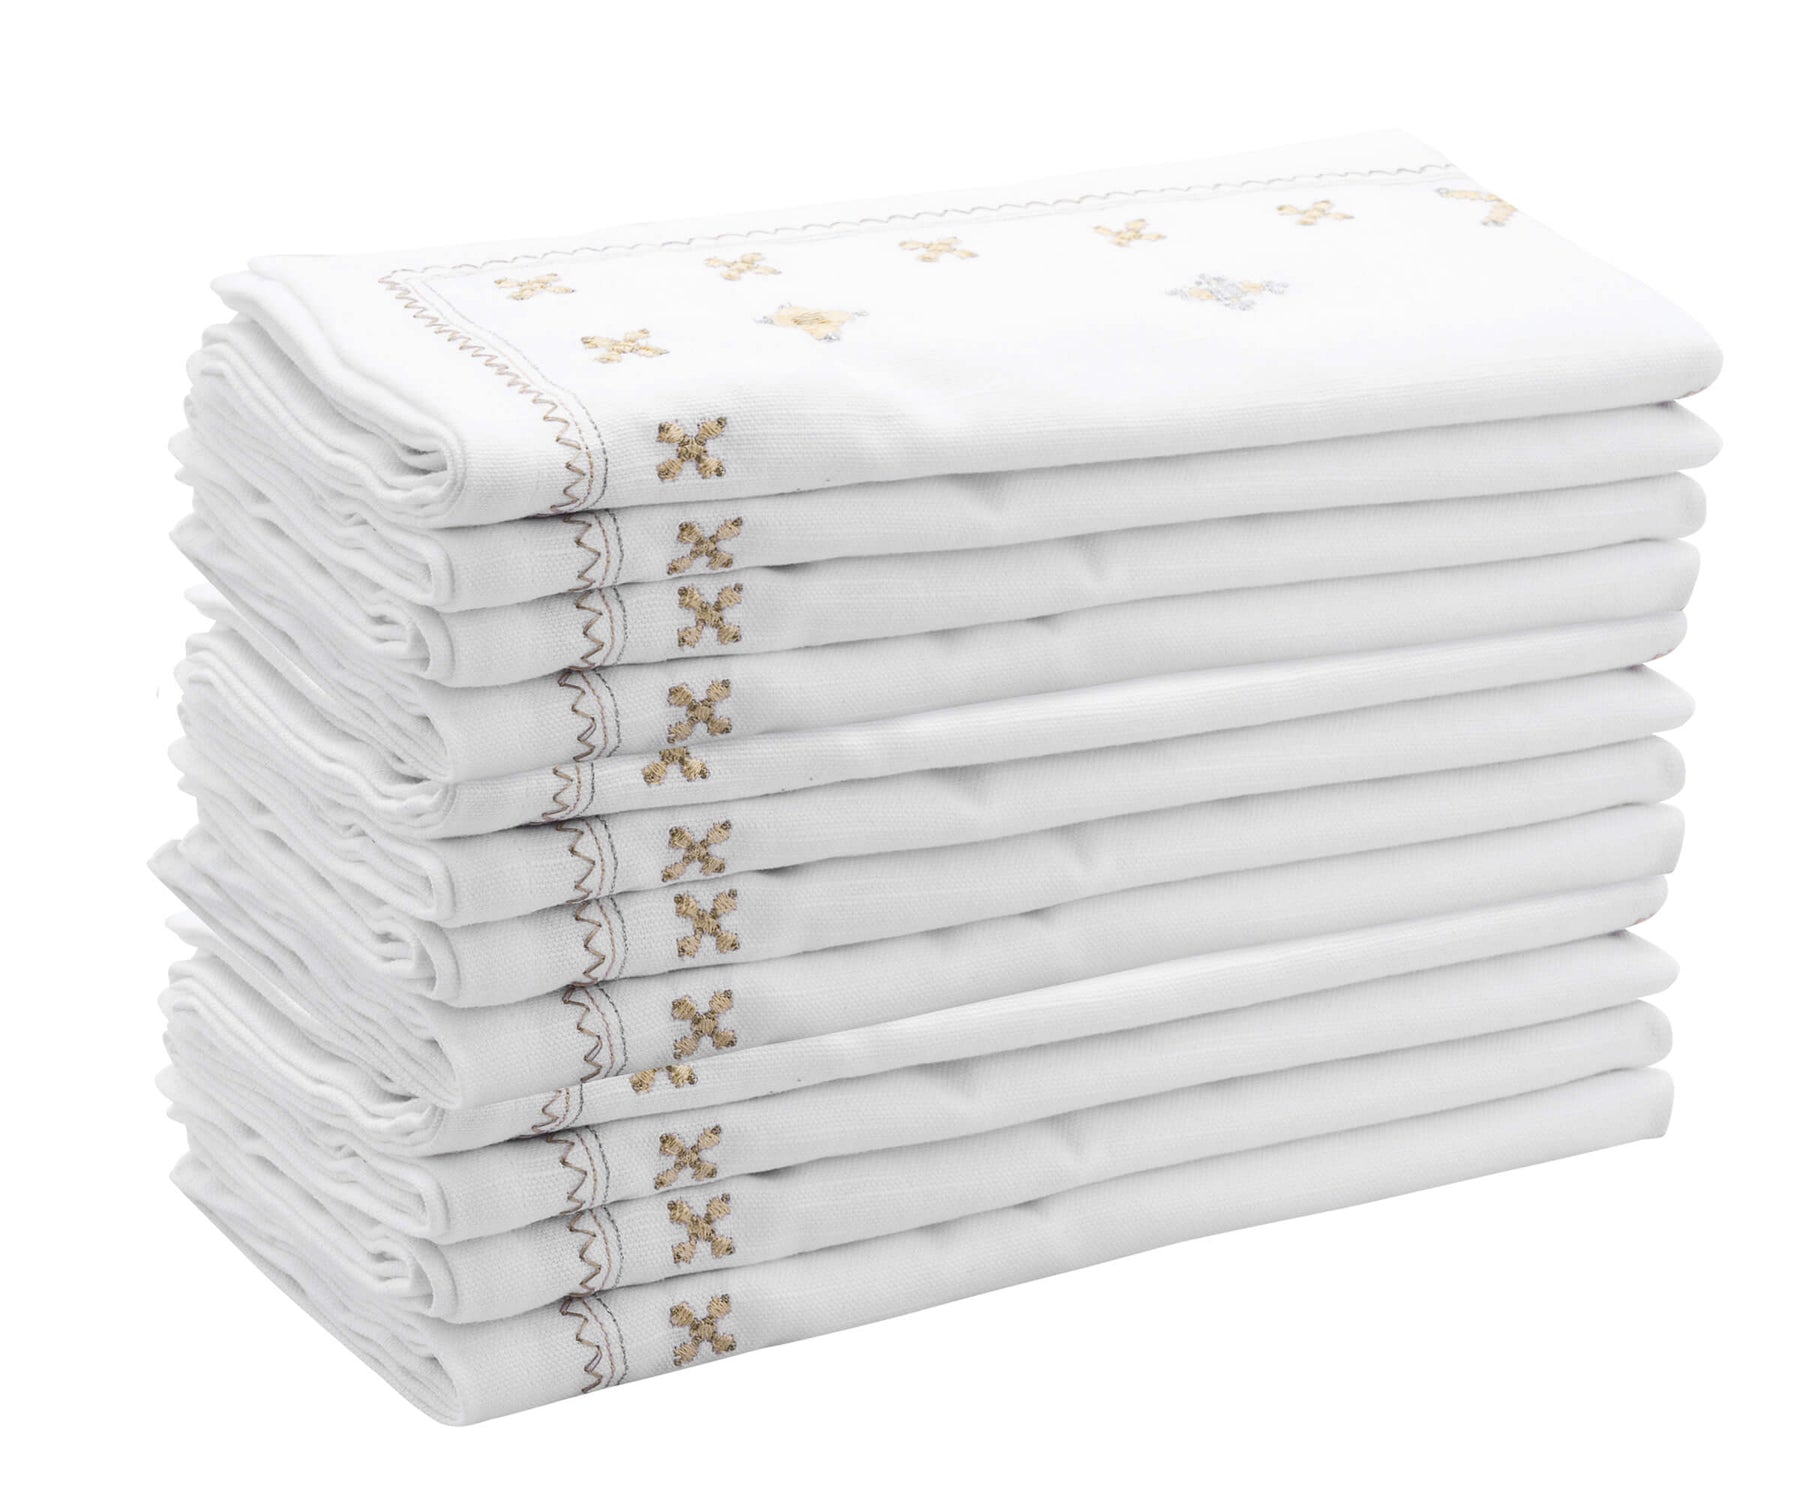 Allergen-Free: Hypoallergenic white napkins are free from common allergens like latex or dyes, suitable for sensitive individuals.